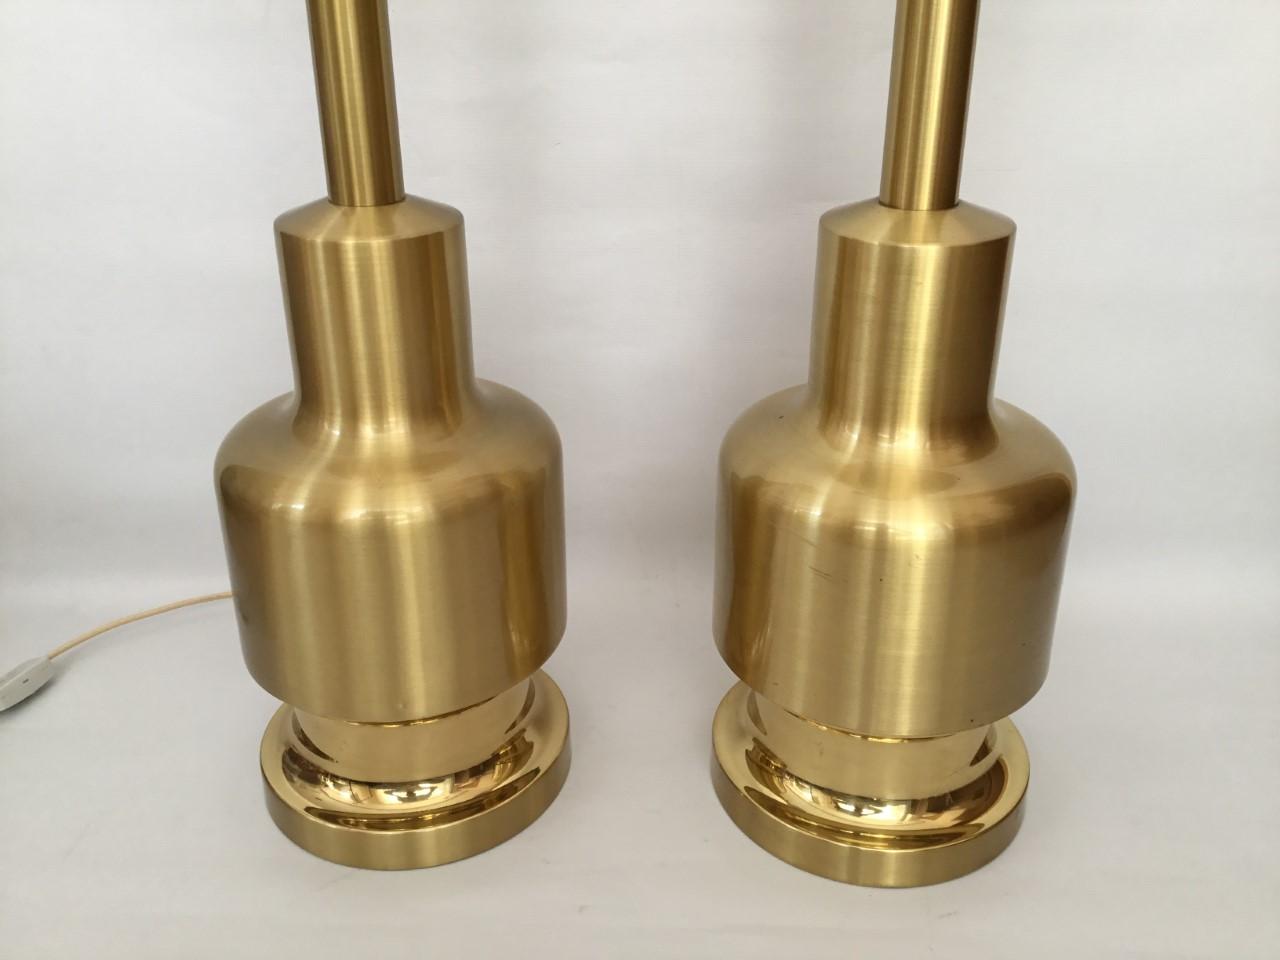 Large Pair of Midcentury Golden Brass Spanish Table Lamps by Clar, 1970s In Good Condition For Sale In Badajoz, Badajoz